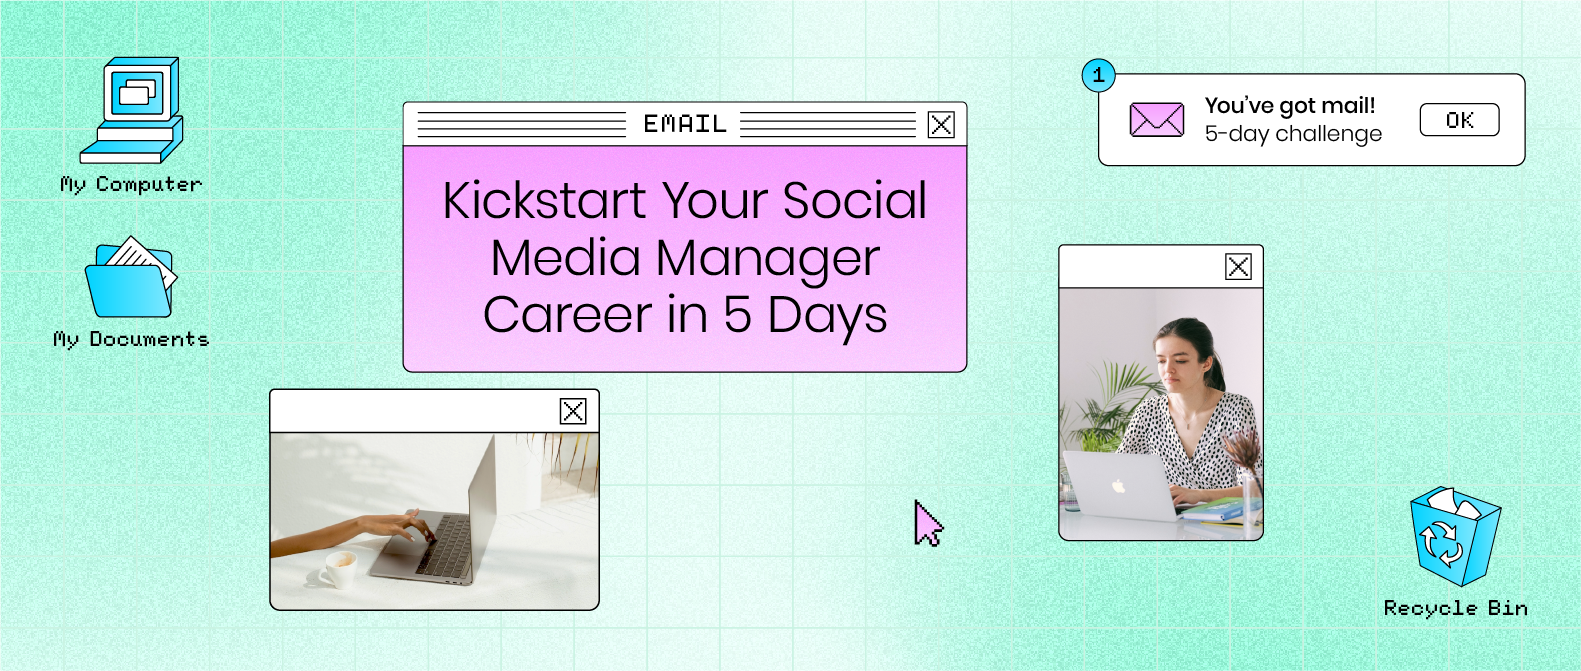 Decorative header, made to look like a computer desktop, reads Kickstart your social media manager career in 5 days